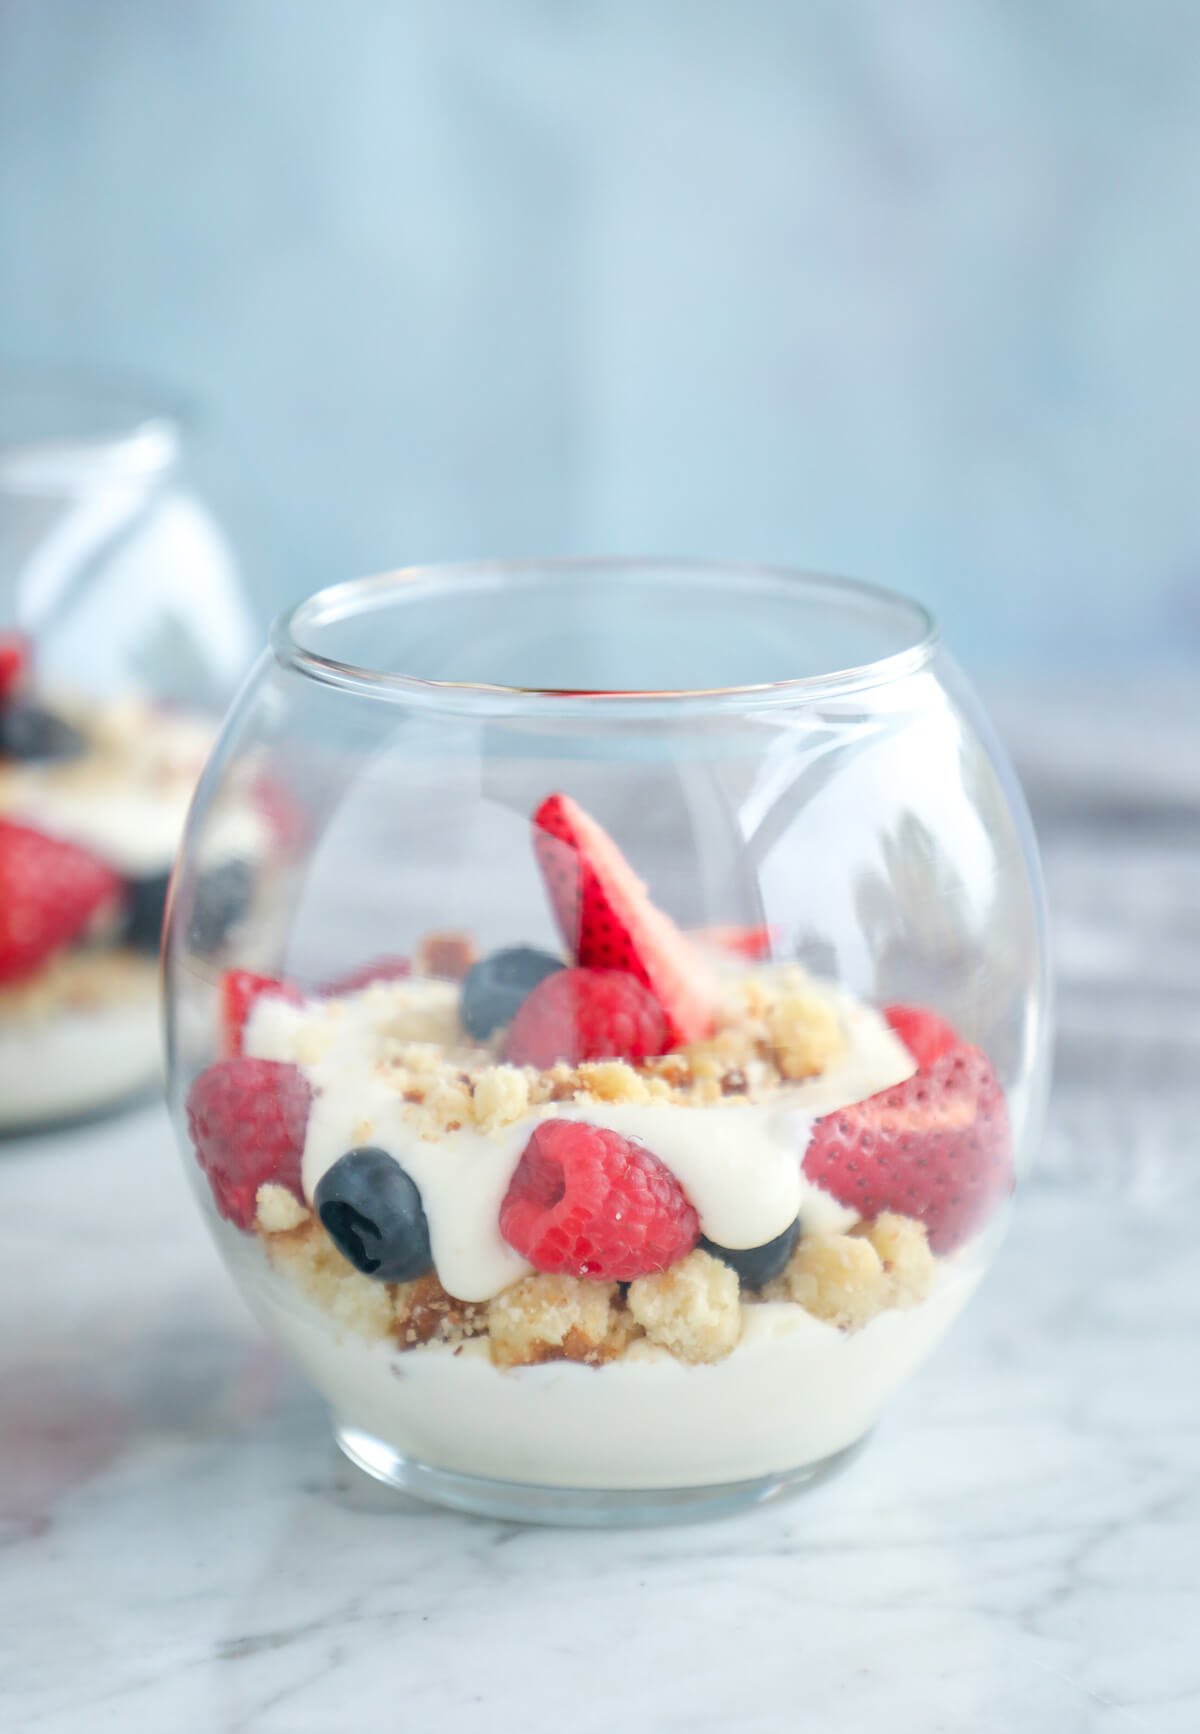 Keto No Bake Cheesecake Parfaits in a large round glass on a marble cutting board